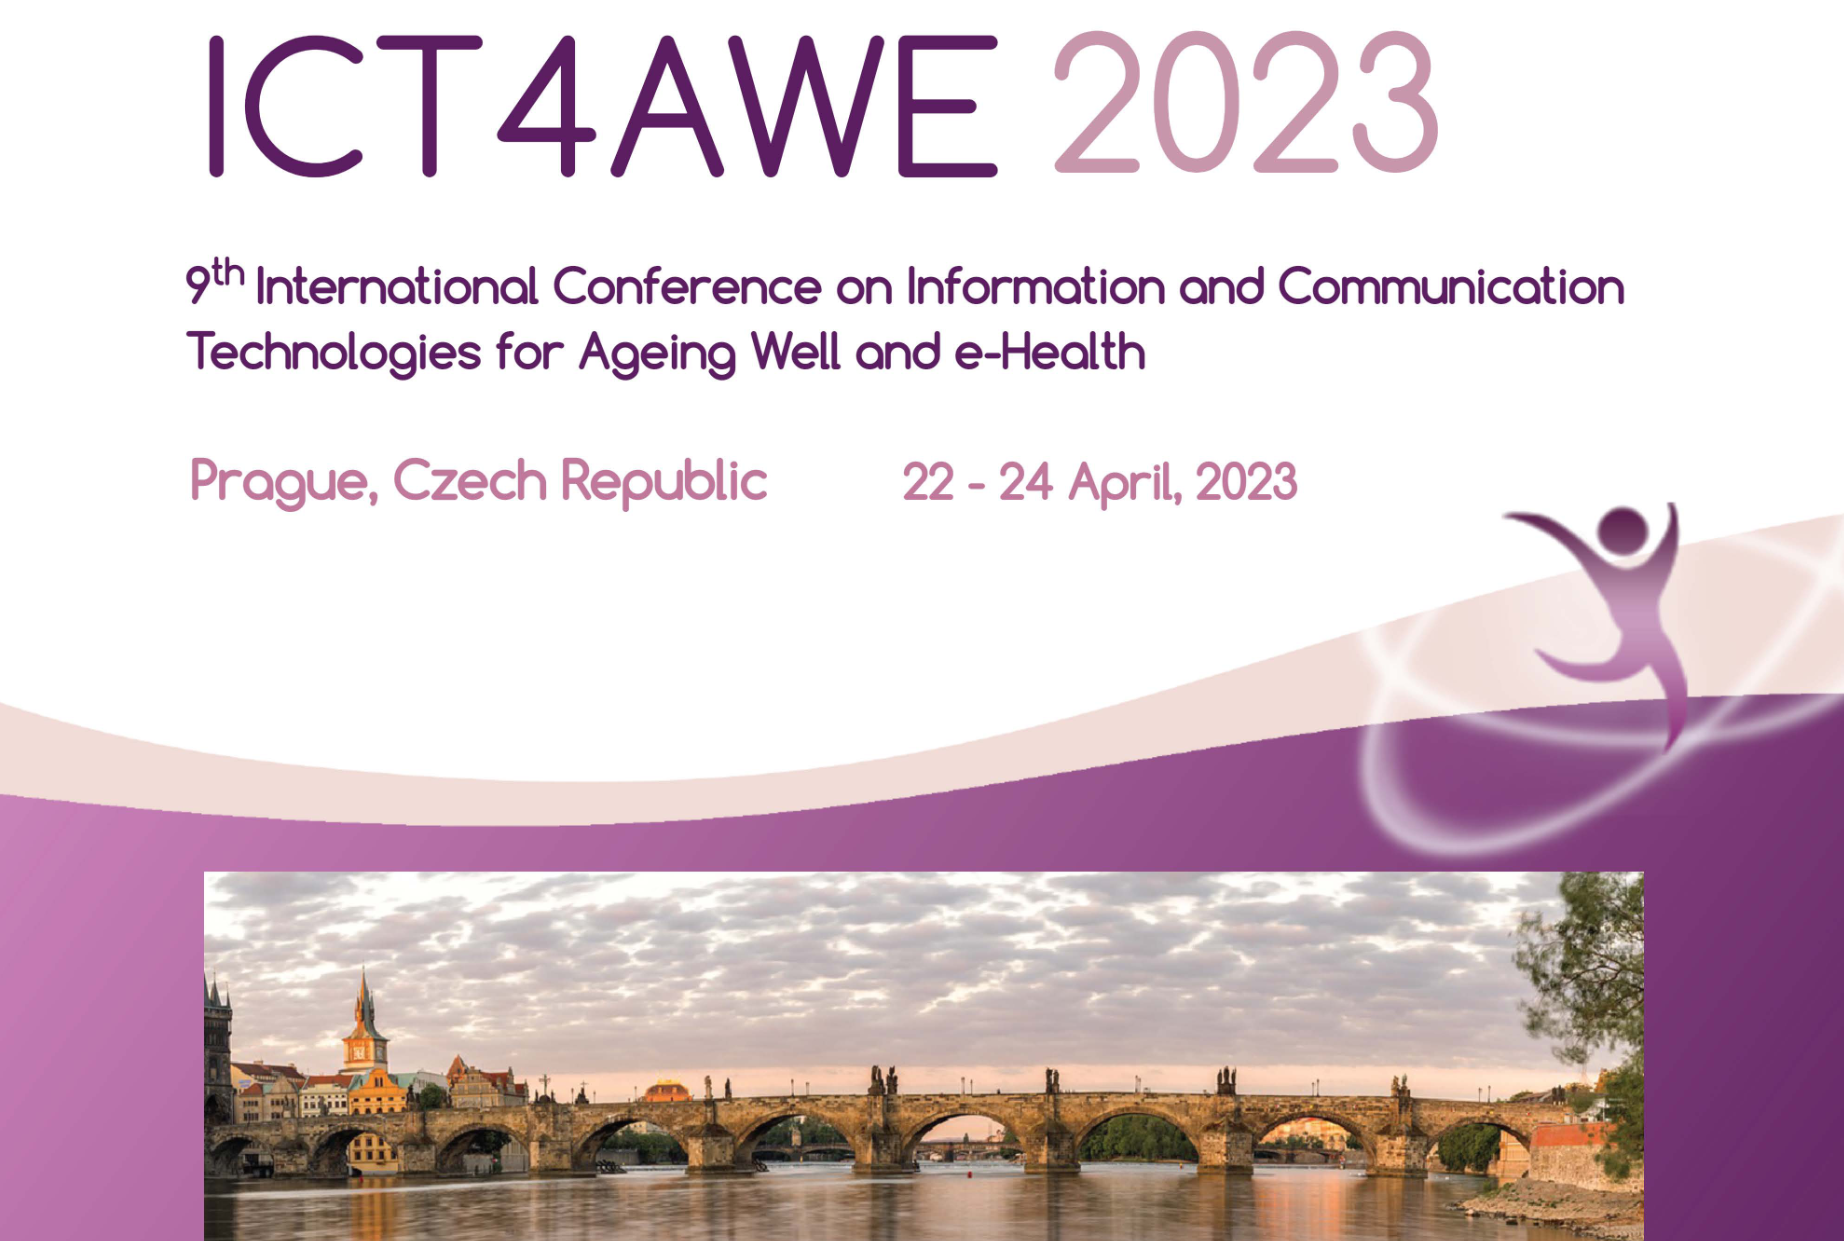 ICT4AWE International Conference on Information and Communication Technologies for Ageing Well and e-Health